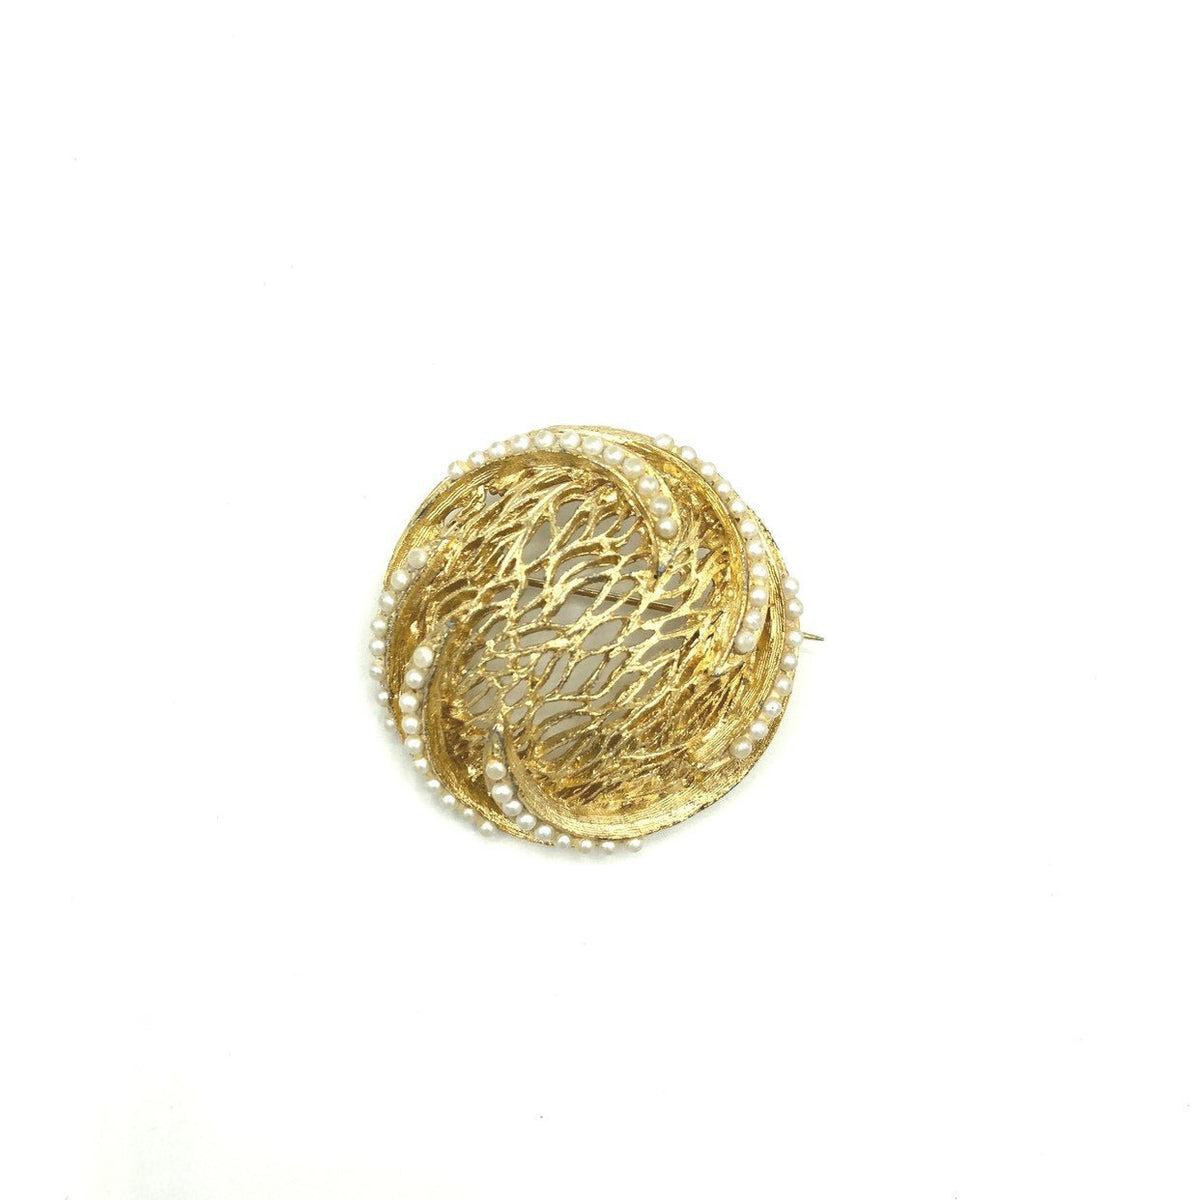 Gold Abstract Web Pearl BSK Vintage Brooch Pin - 24 Wishes Vintage Jewelry